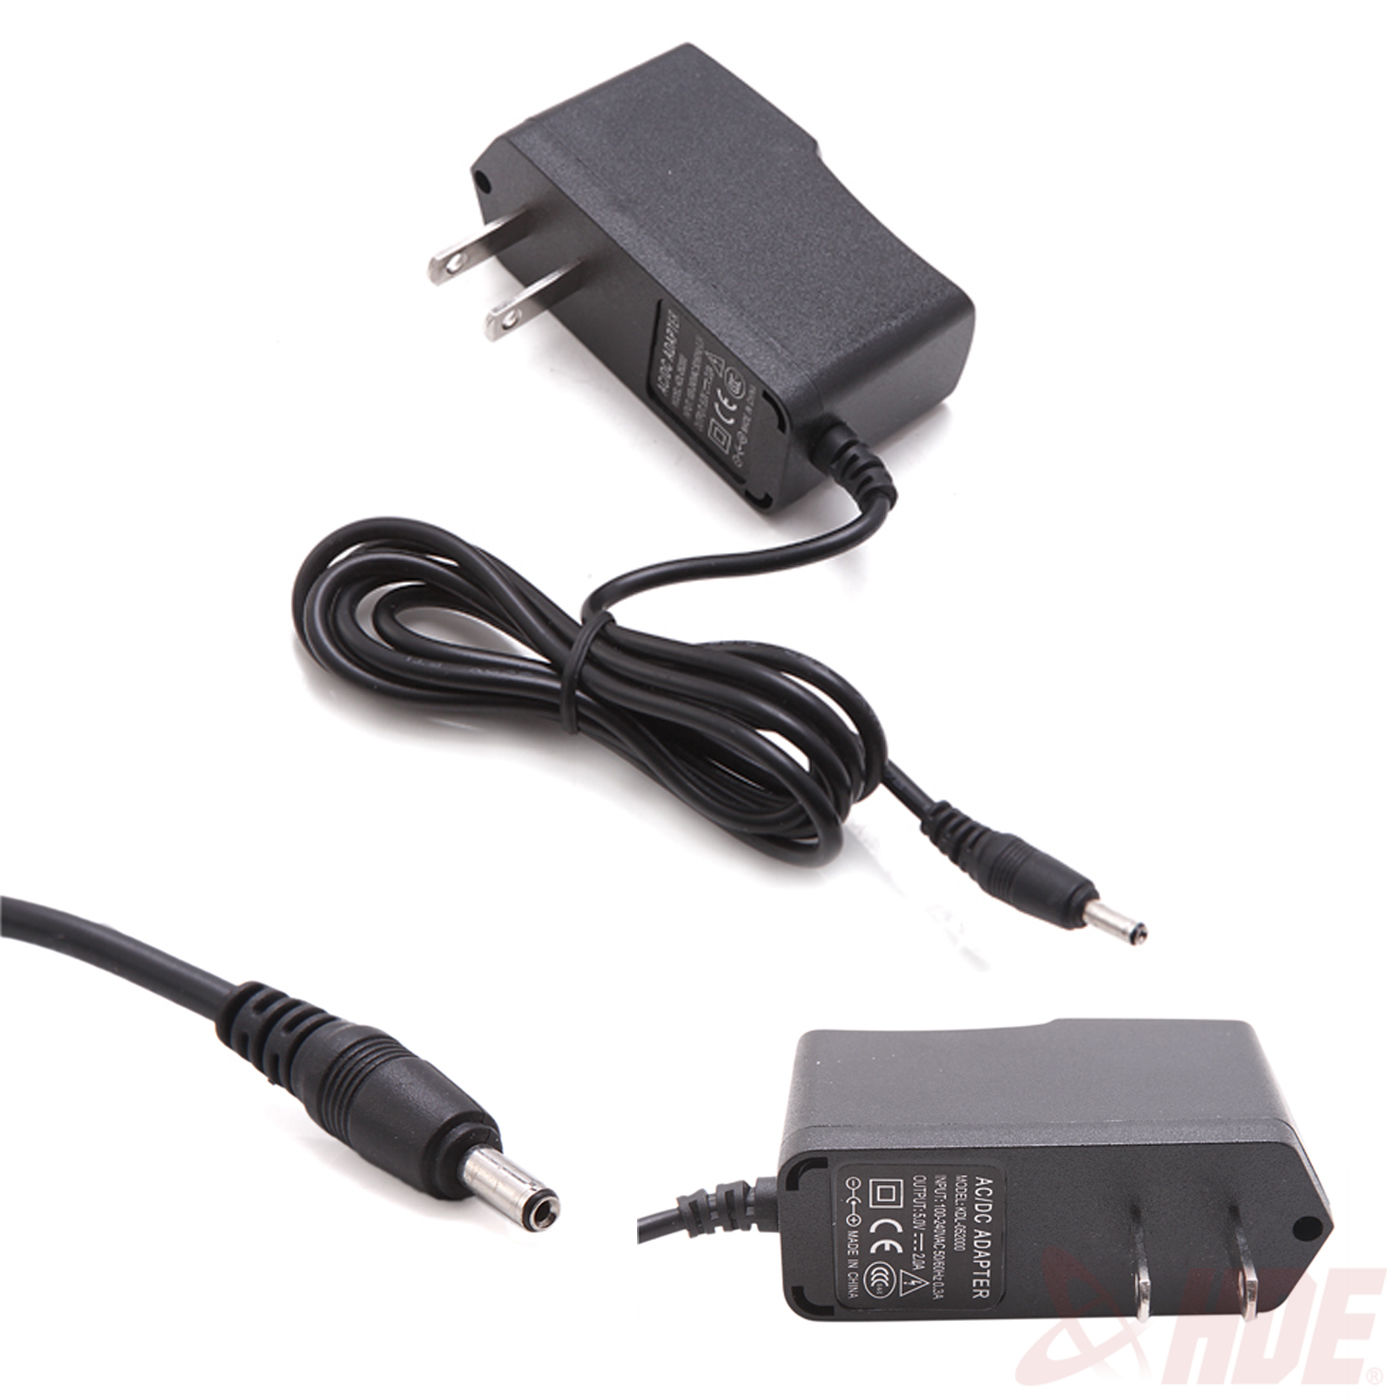 5V 2A AC/DC 3.5mm US Plug Power Supply Adapter Converter Tablet Charger PC Black